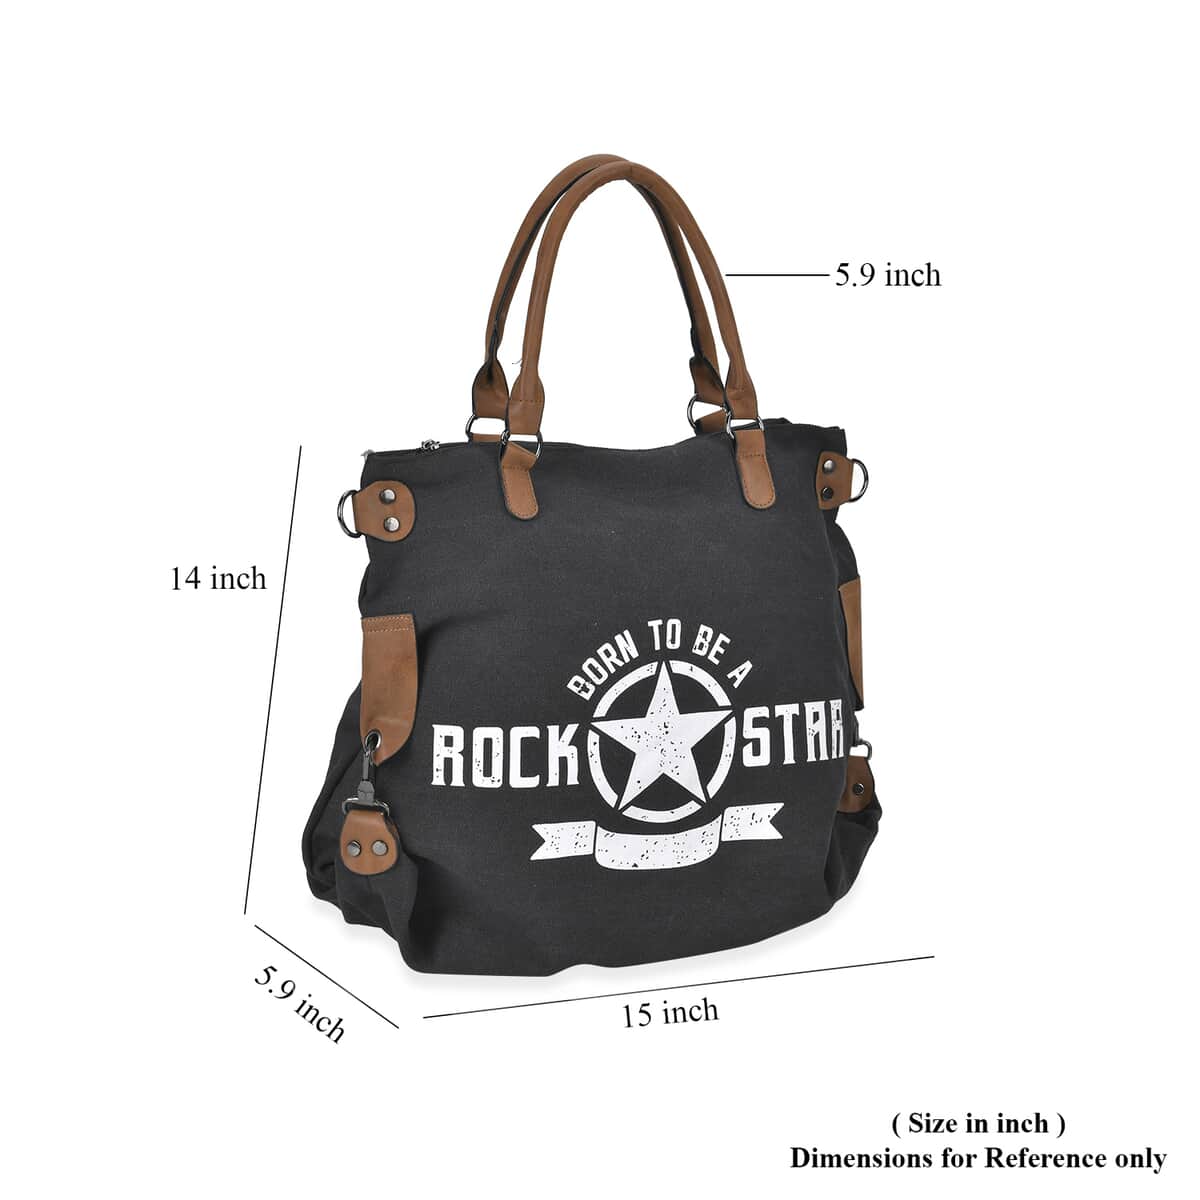 Navy Collection Black Color Printed Tote Bag (15"x5.9"x14") with Handle Drop image number 6